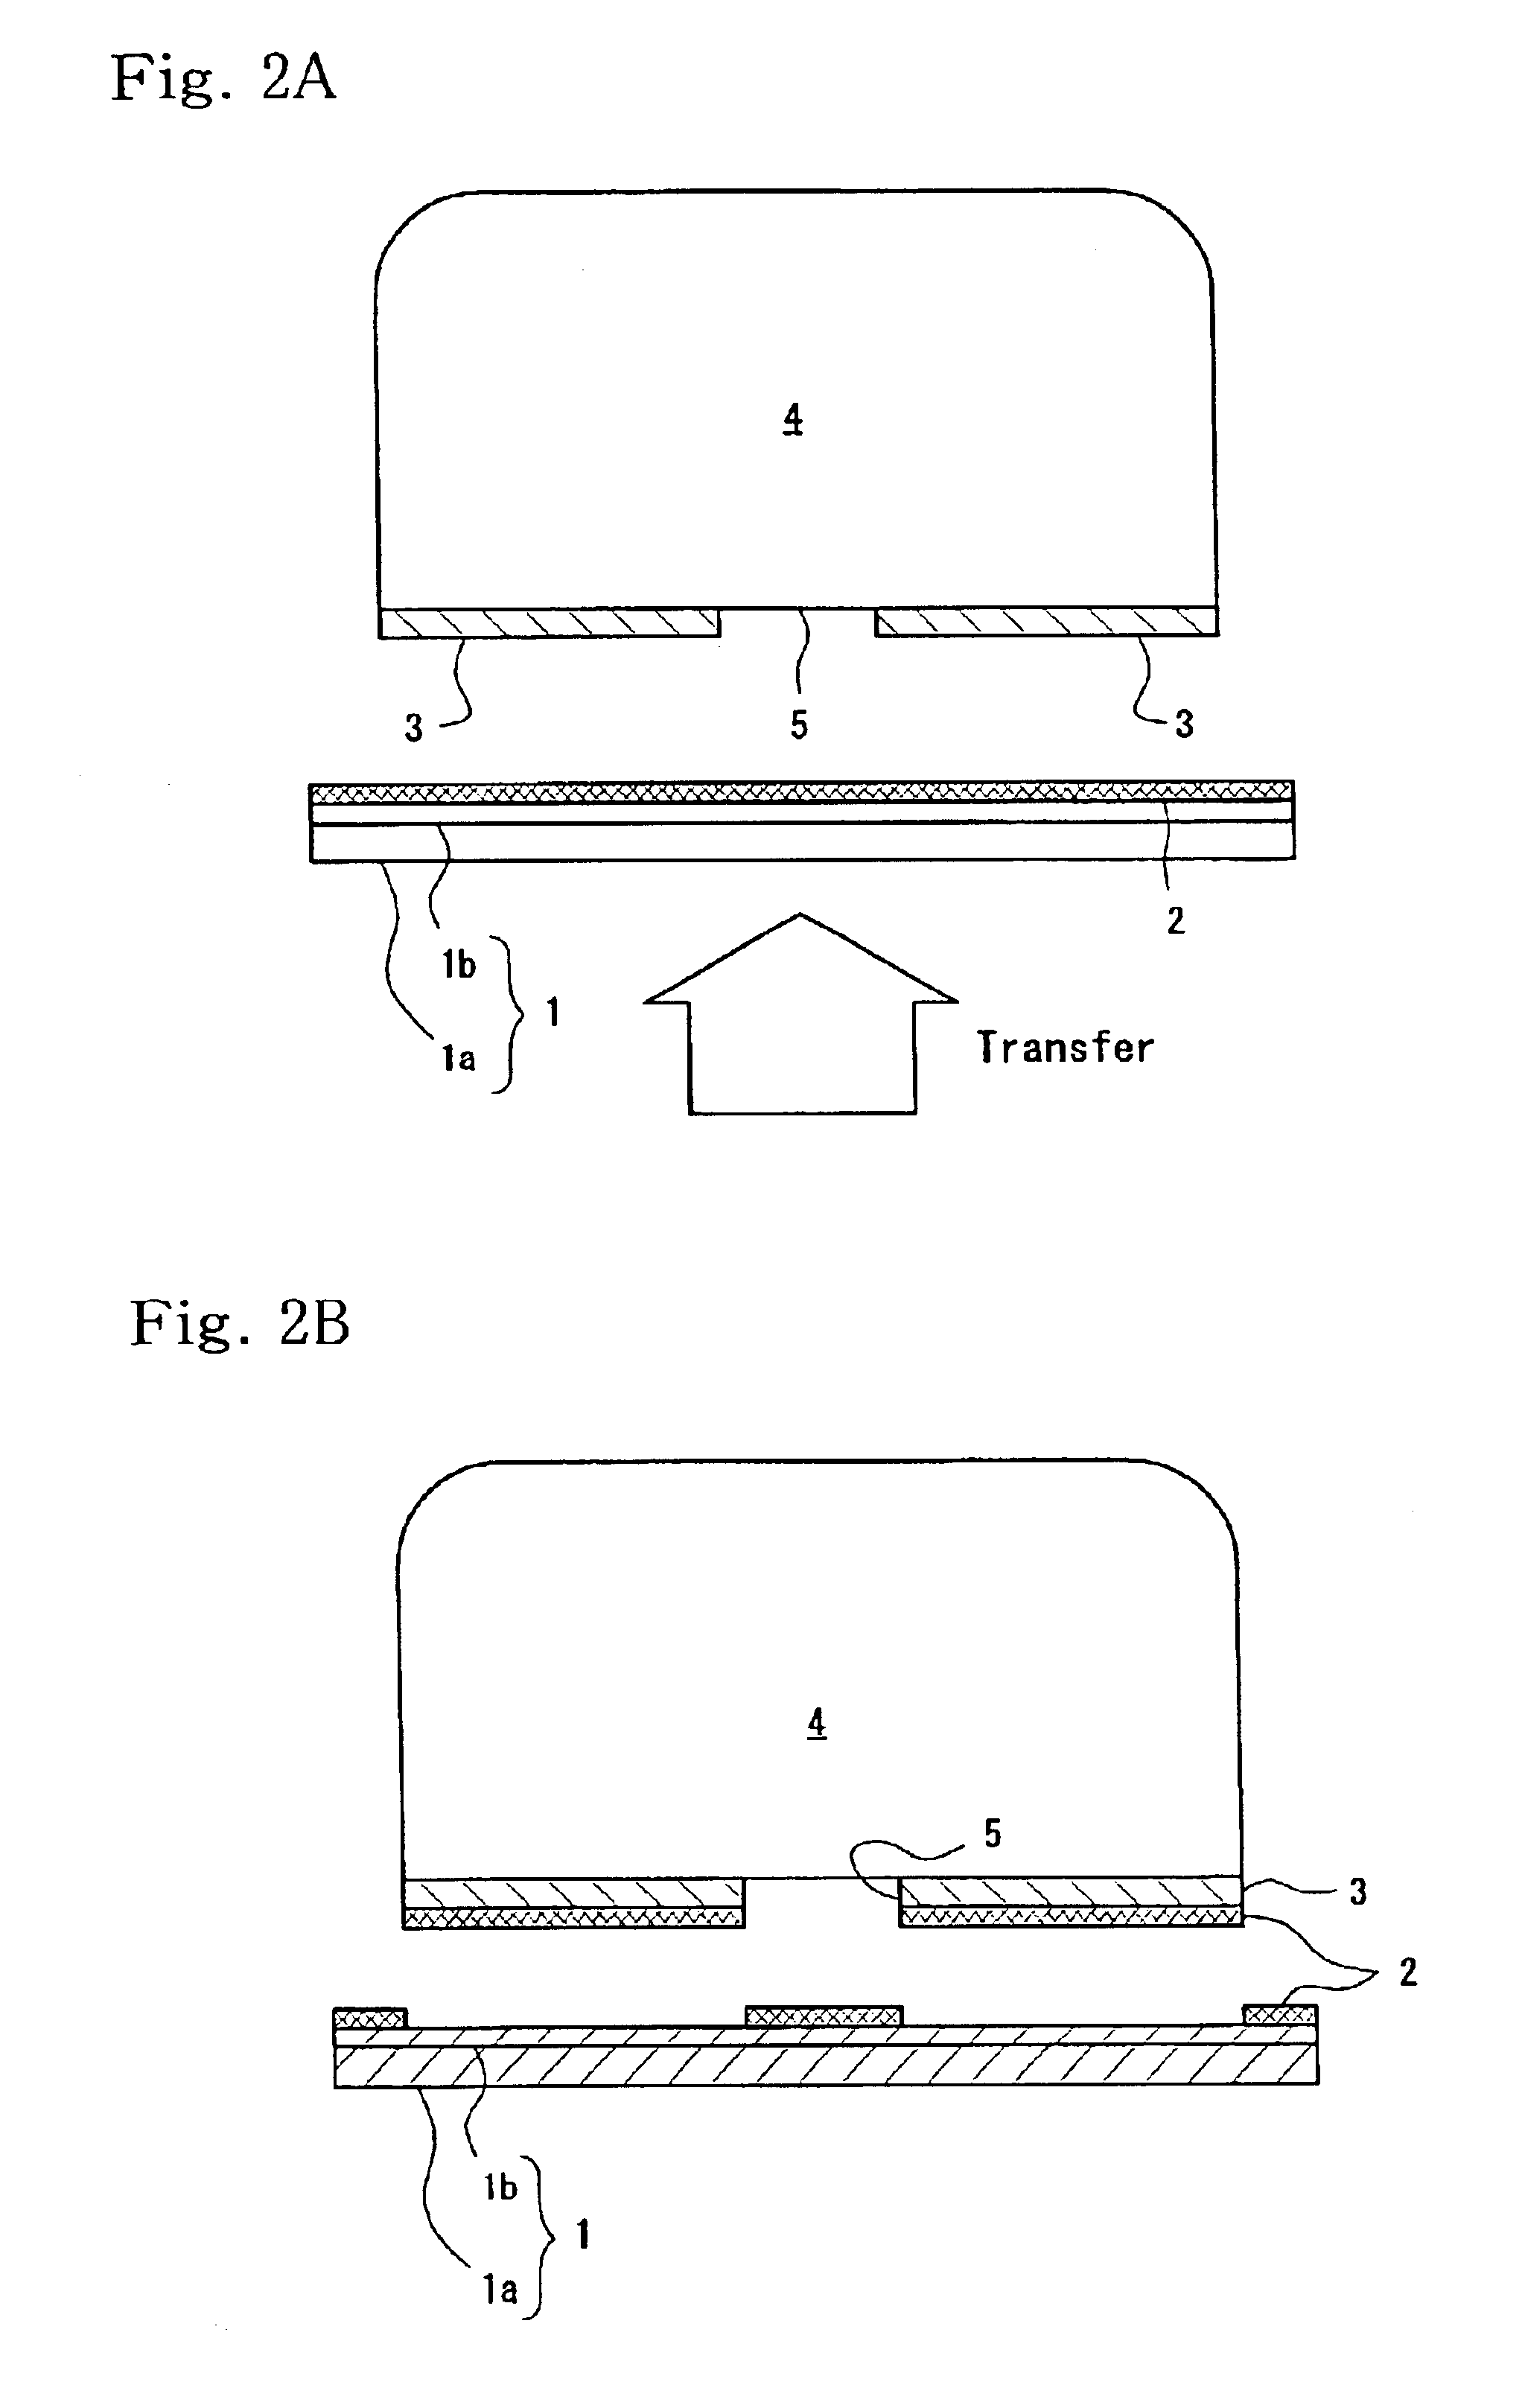 Method of manufacturing a key top for a push-button switch